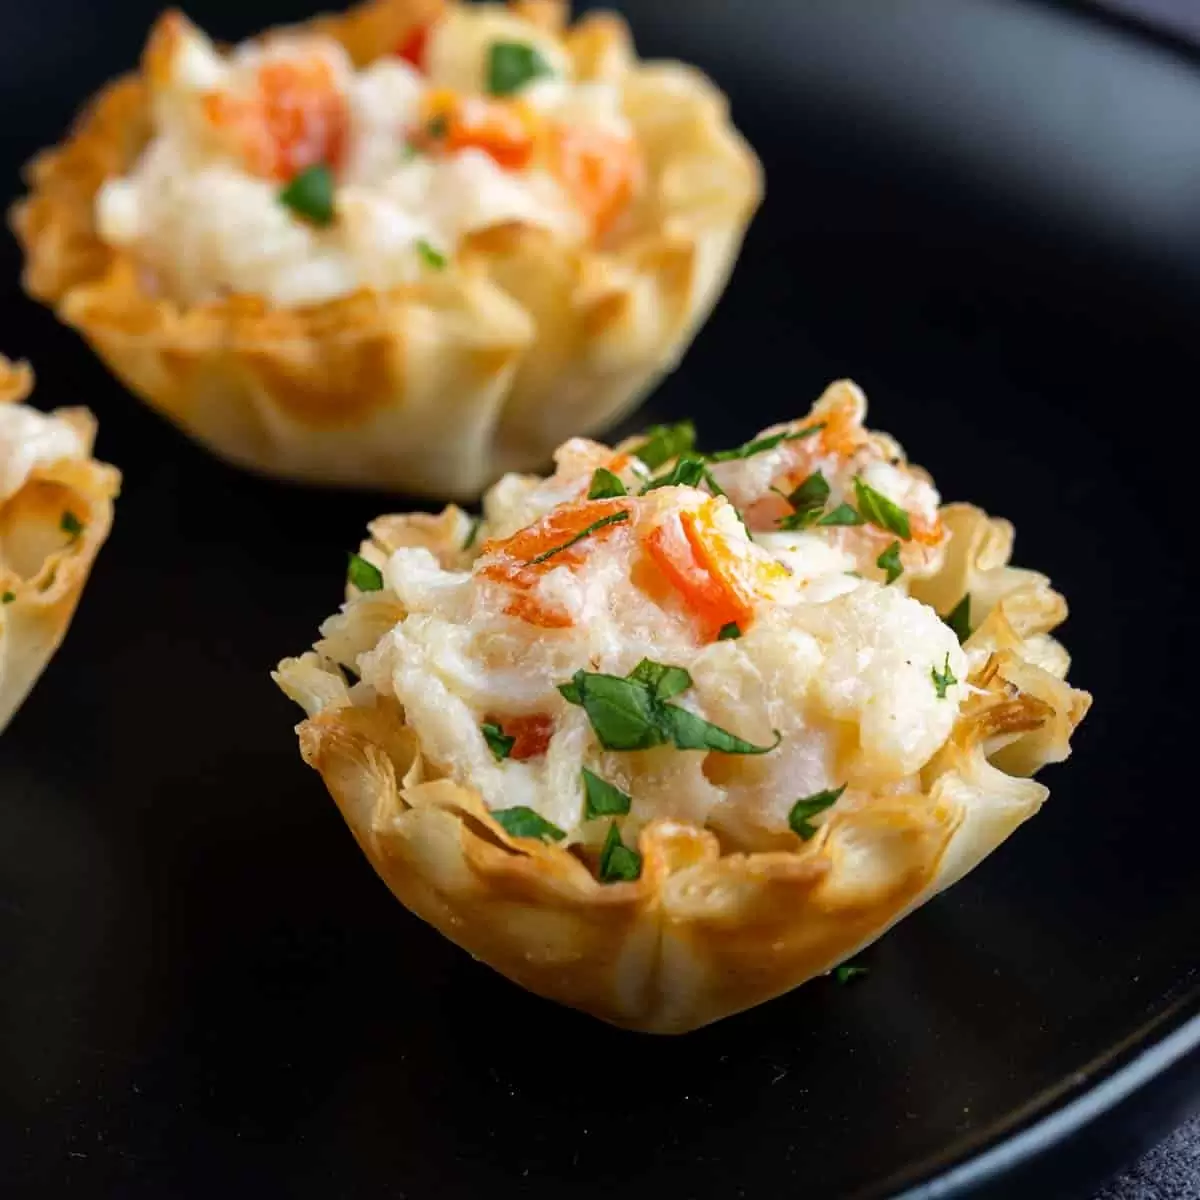 Crab puff pastry cups with crabmeat and parsley on a black plate.